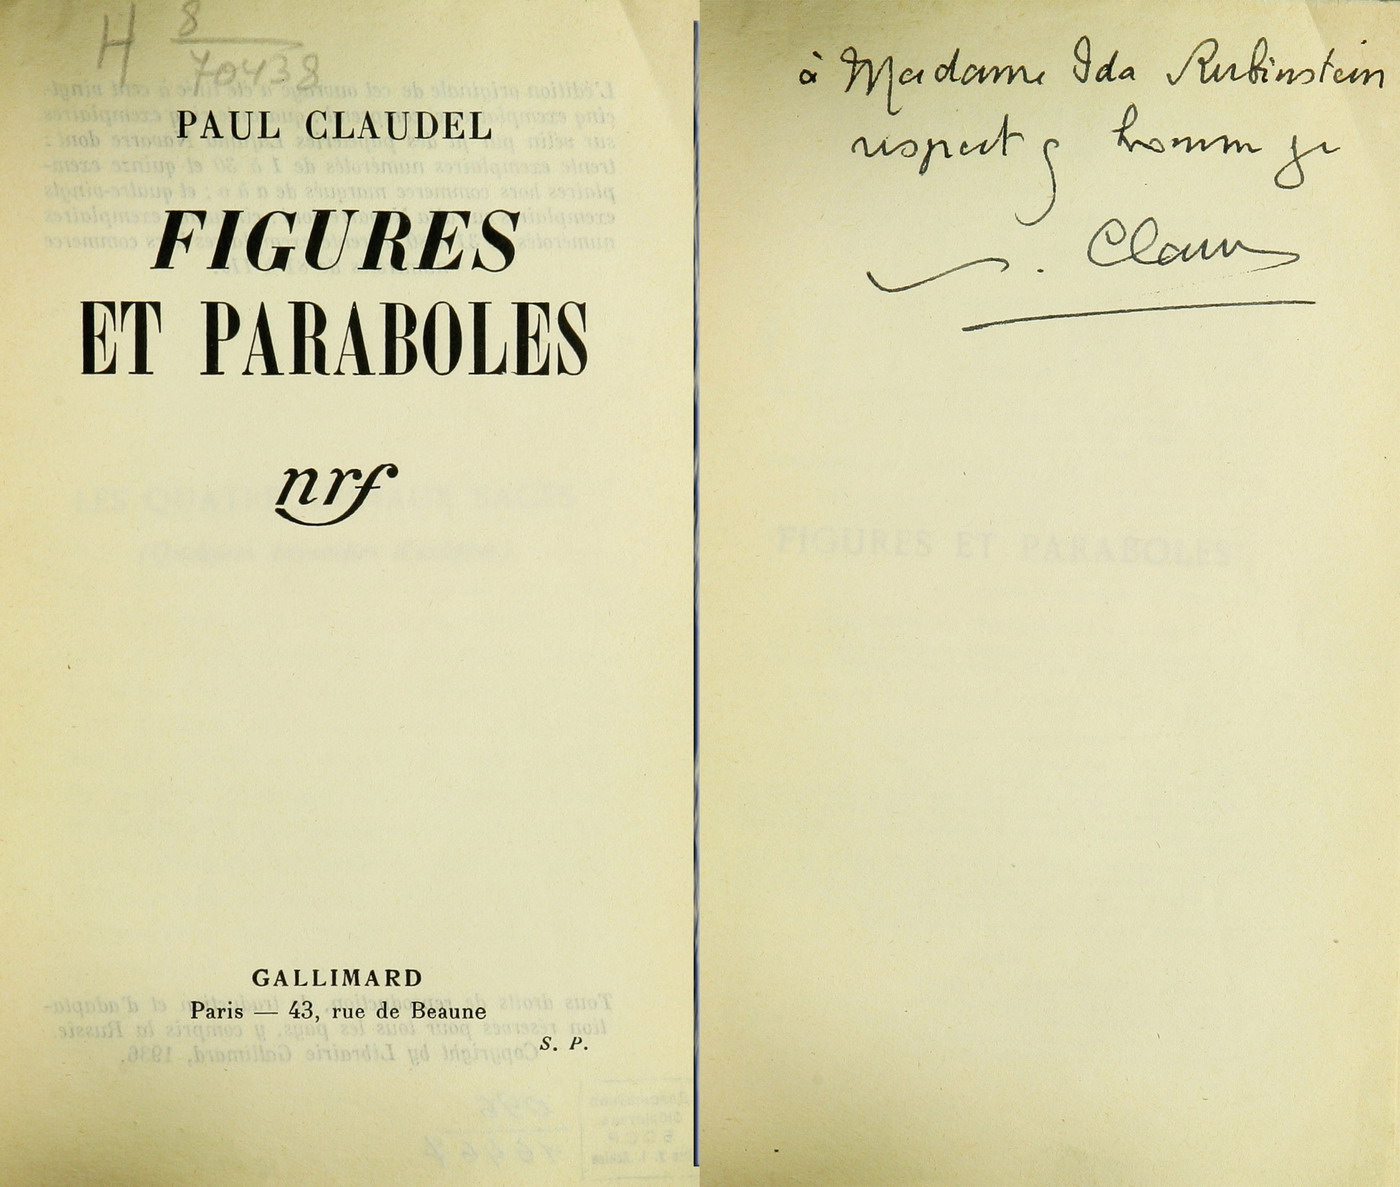 French Autographs in the Collection of the National Library of Belarus